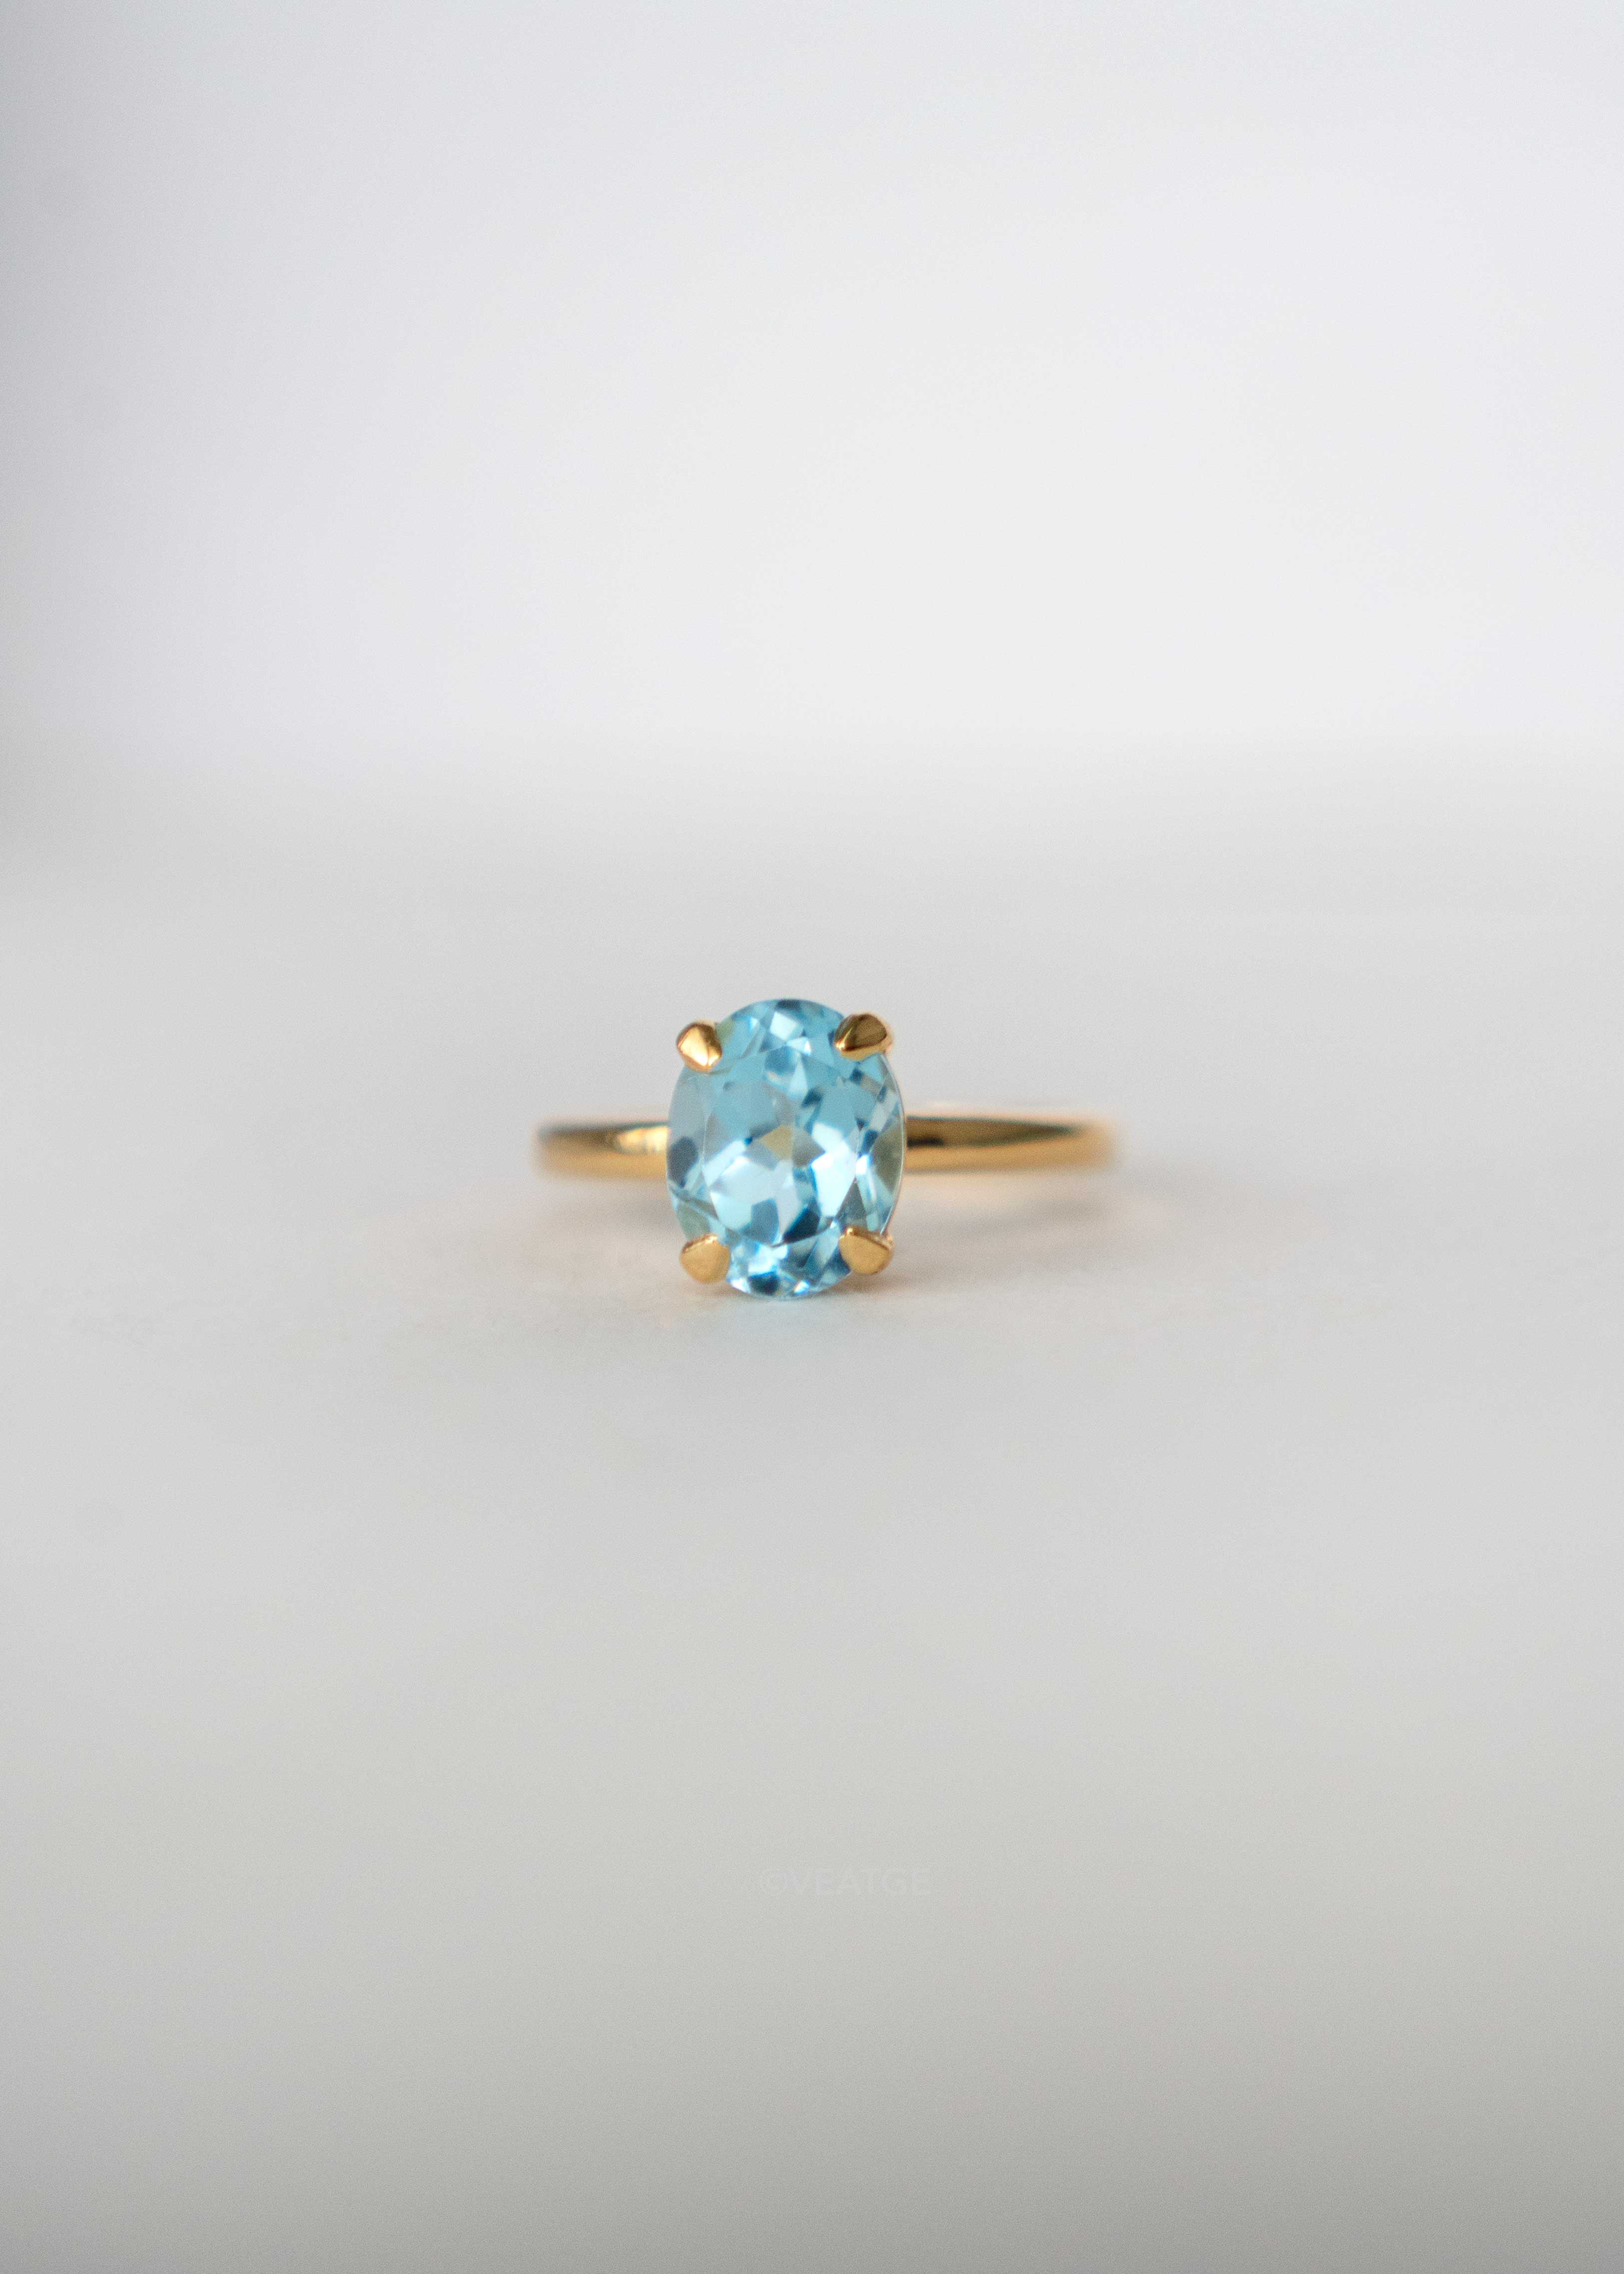 Genuine Blue Topaz Engagement Promise Proposal Ring Gold Gifts for Women December Birthstone